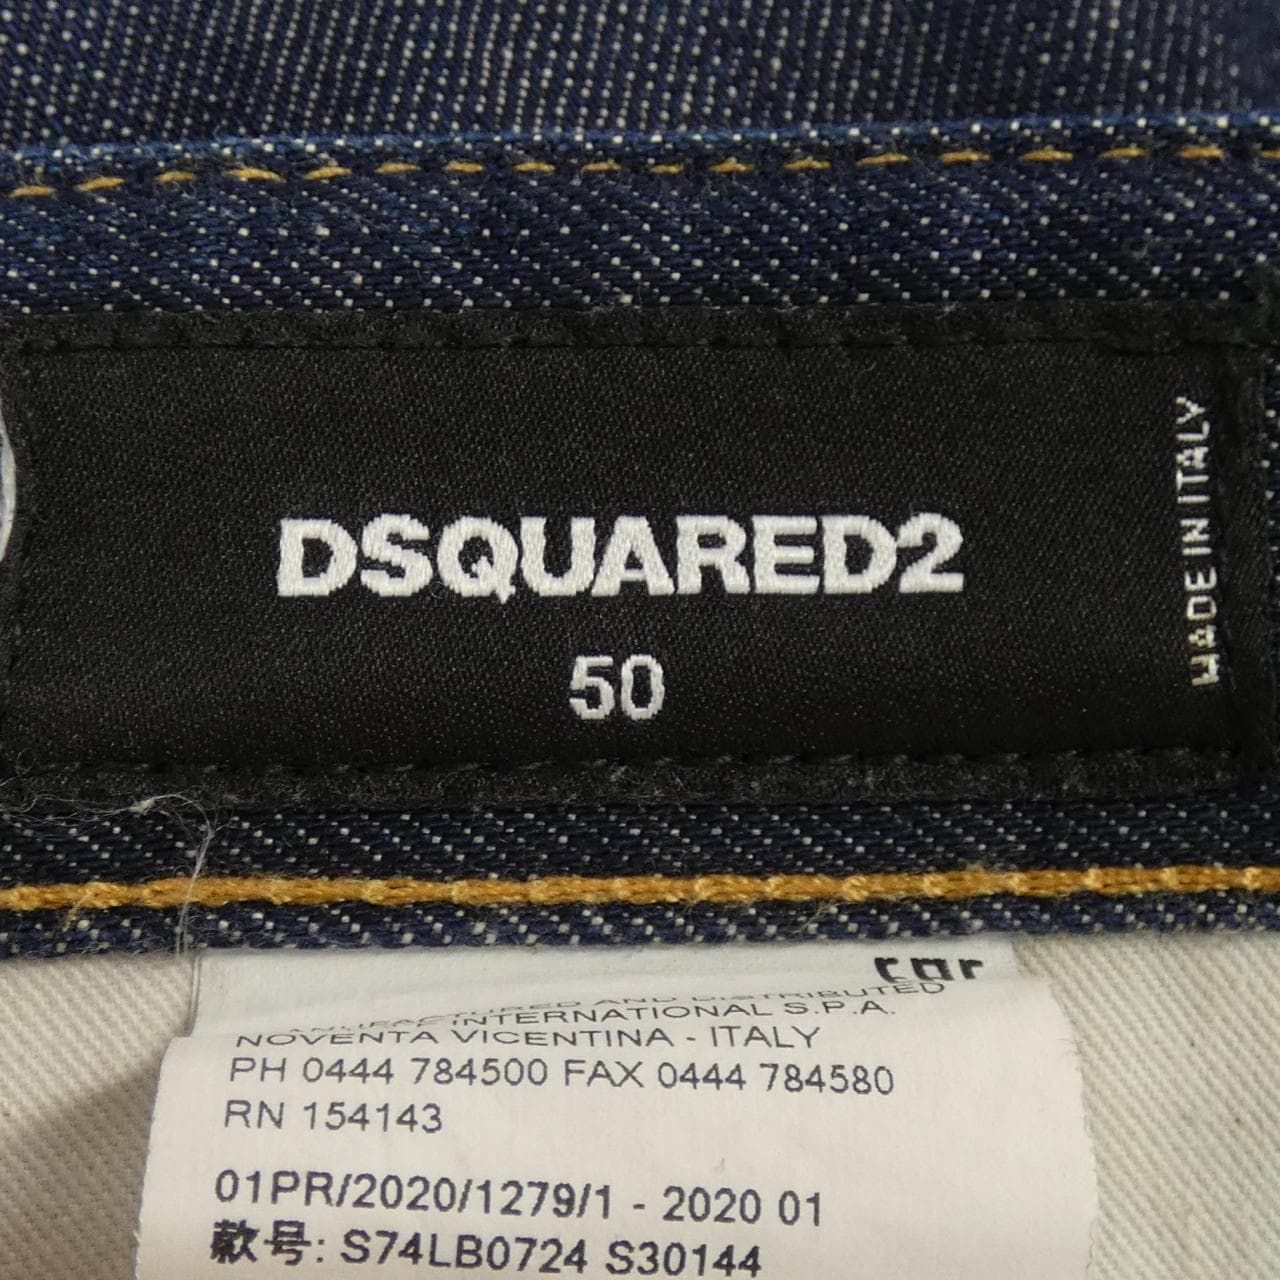 DSQUARED2 DSQUARED2 Jeans